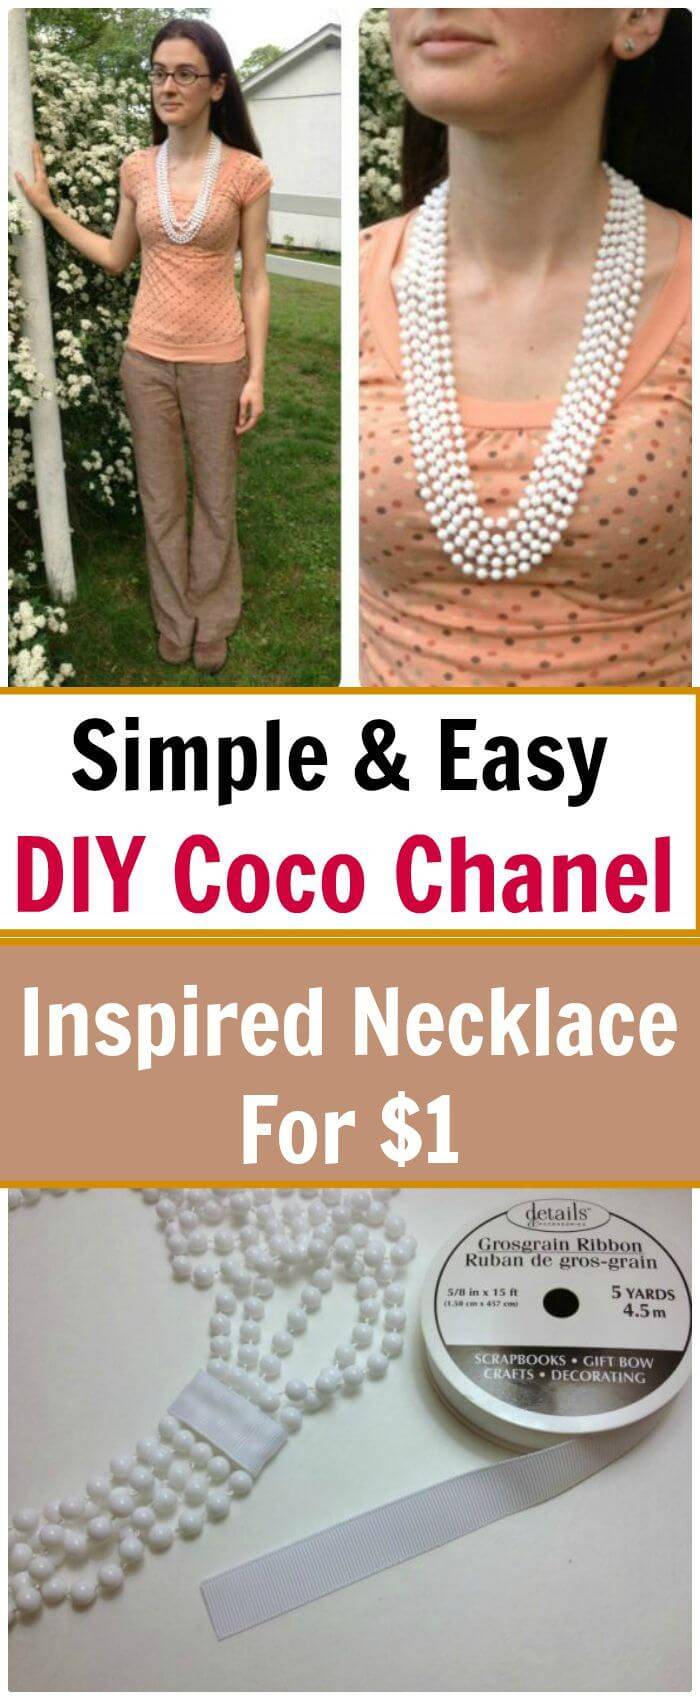 DIY Coco Chanel Inspired Necklace For $1